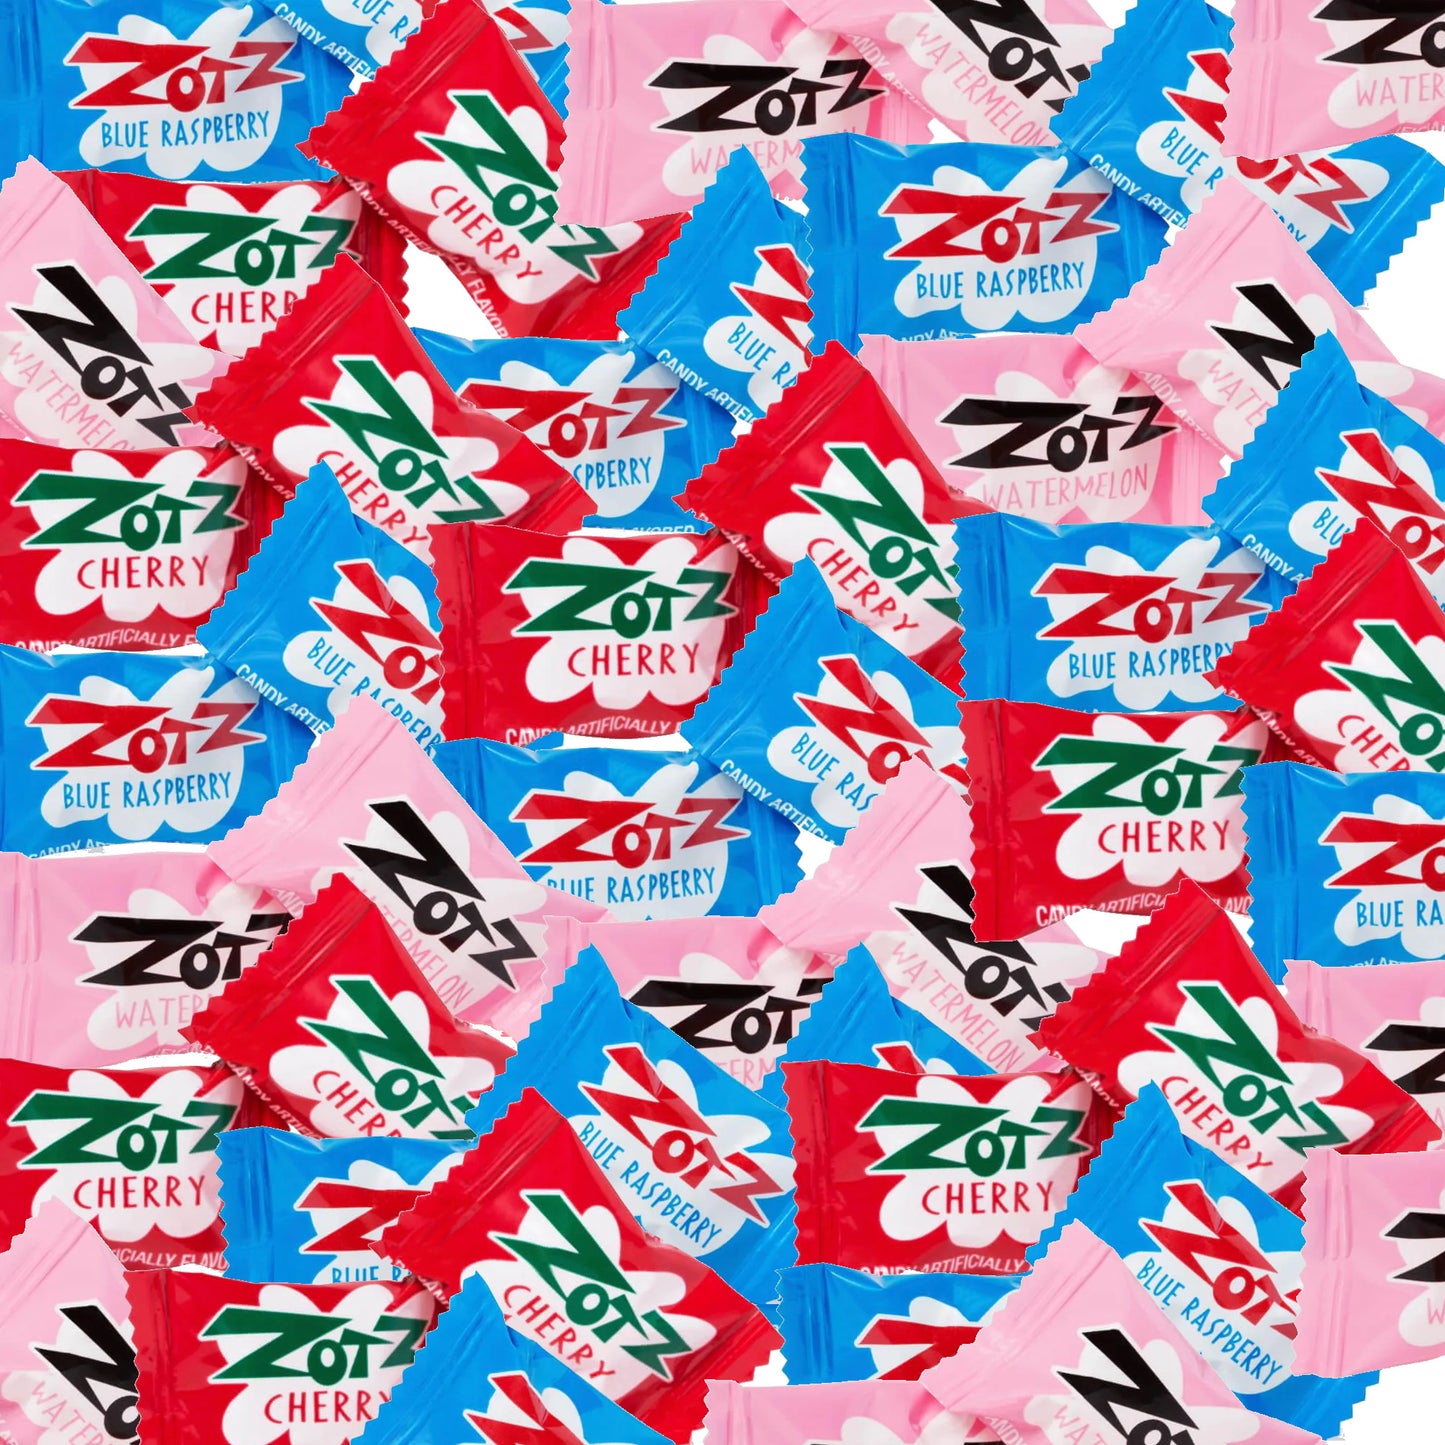 Zotz Fizzy Candy Assorted Bulk 2LB Bag of Zots Vintage Candy, Retro Candy,  Weird Candy, Zots Candies by Snackivore. 175pcs total- Watermelon, Blue